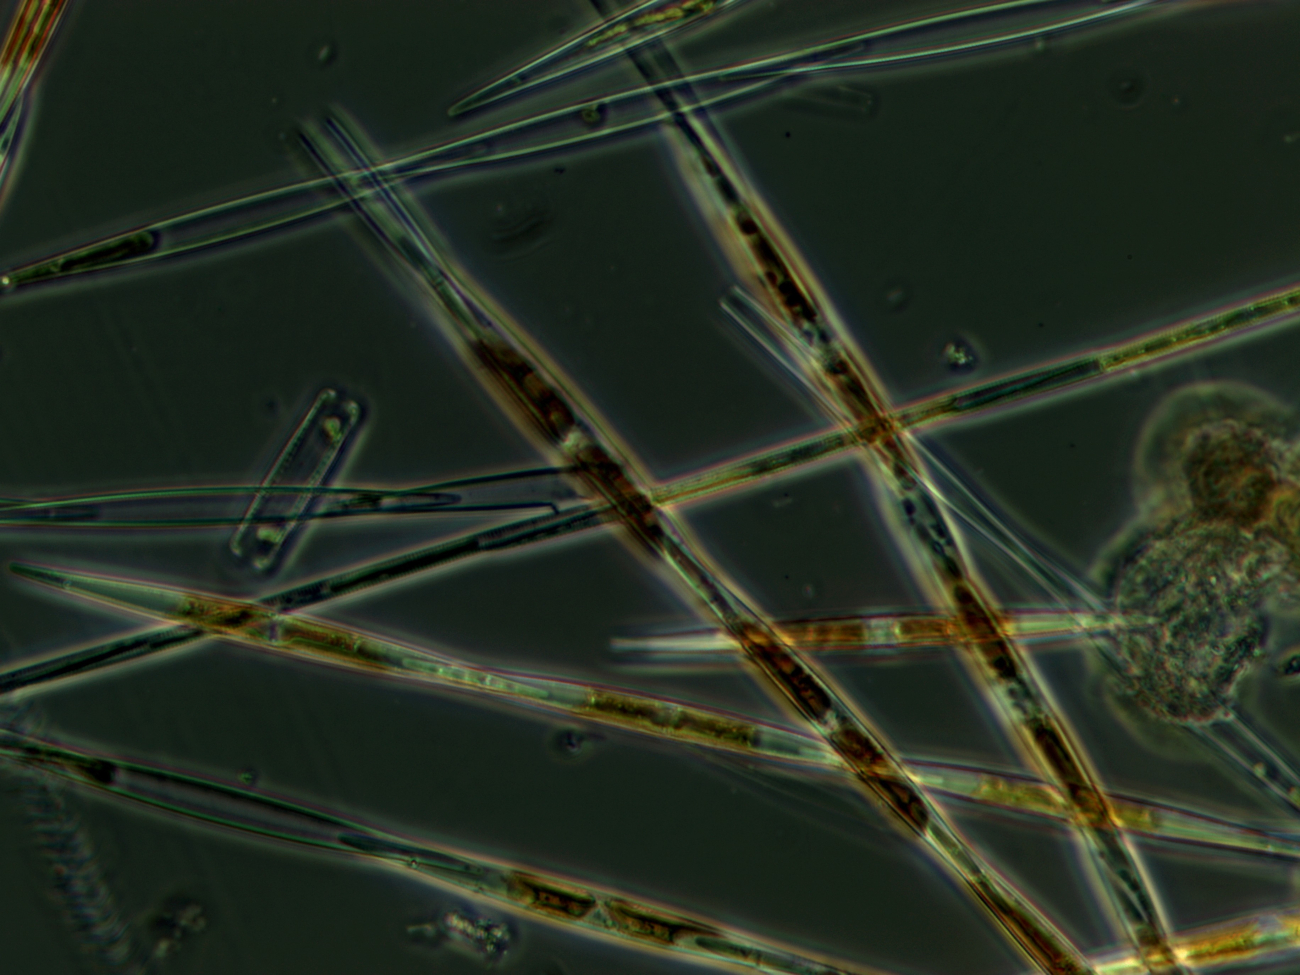 Cellular look at Pseudo-nitzschia, a harmful algal bloom that is threateninghealth of humans and marine mammals by creating toxins in filter feedingfish and shellfish